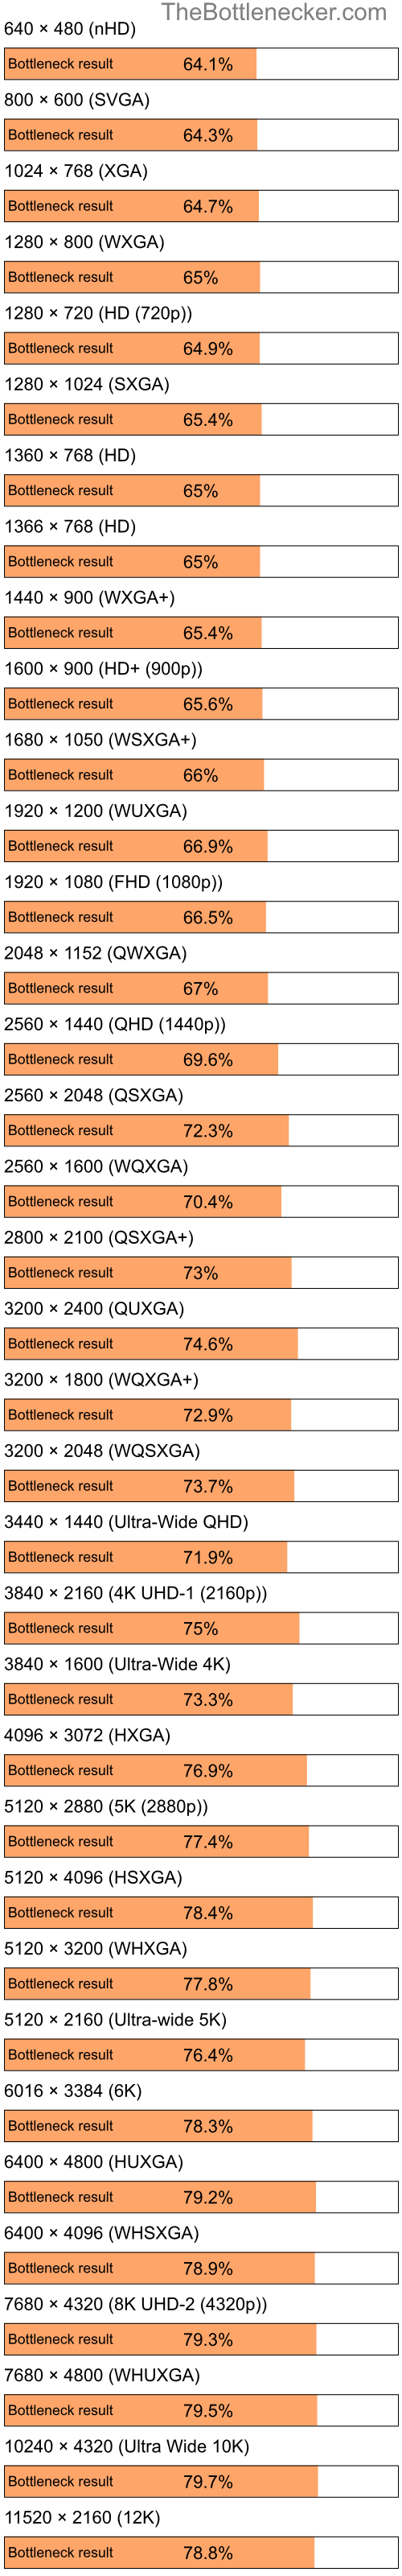 Bottleneck results by resolution for Intel Pentium 4 and AMD Radeon 2100 in Processor Intense Tasks